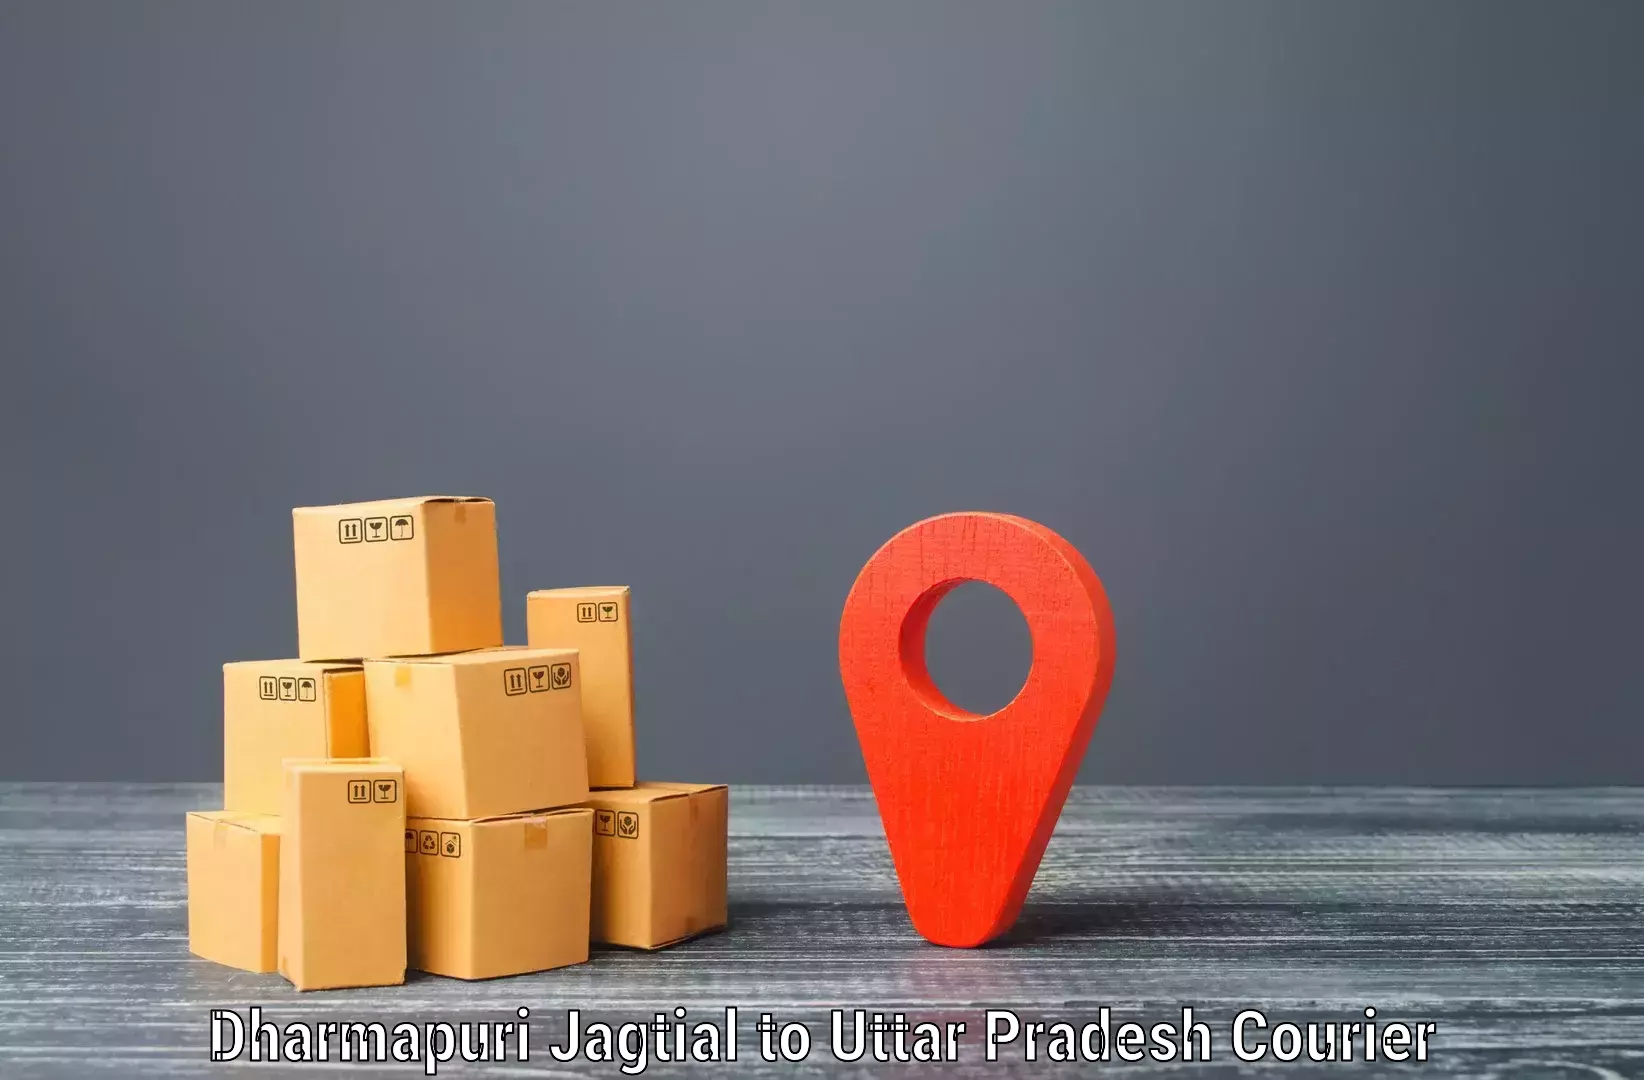 24-hour courier services Dharmapuri Jagtial to Sirathu